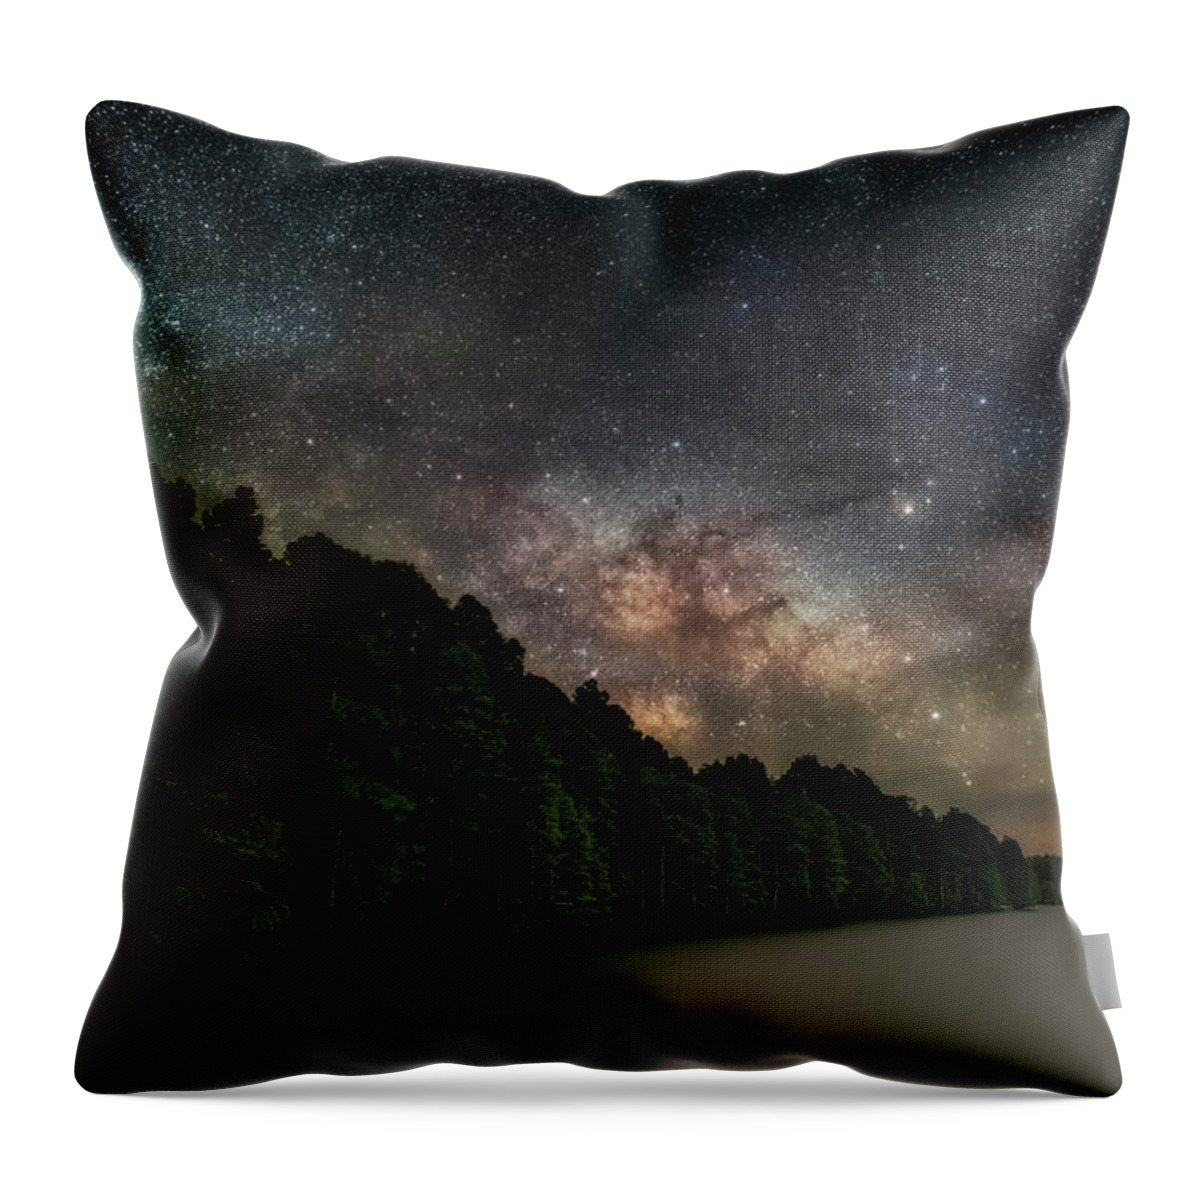 Starlight Swimming Throw Pillow featuring the photograph Starlight Swimming by Russell Pugh